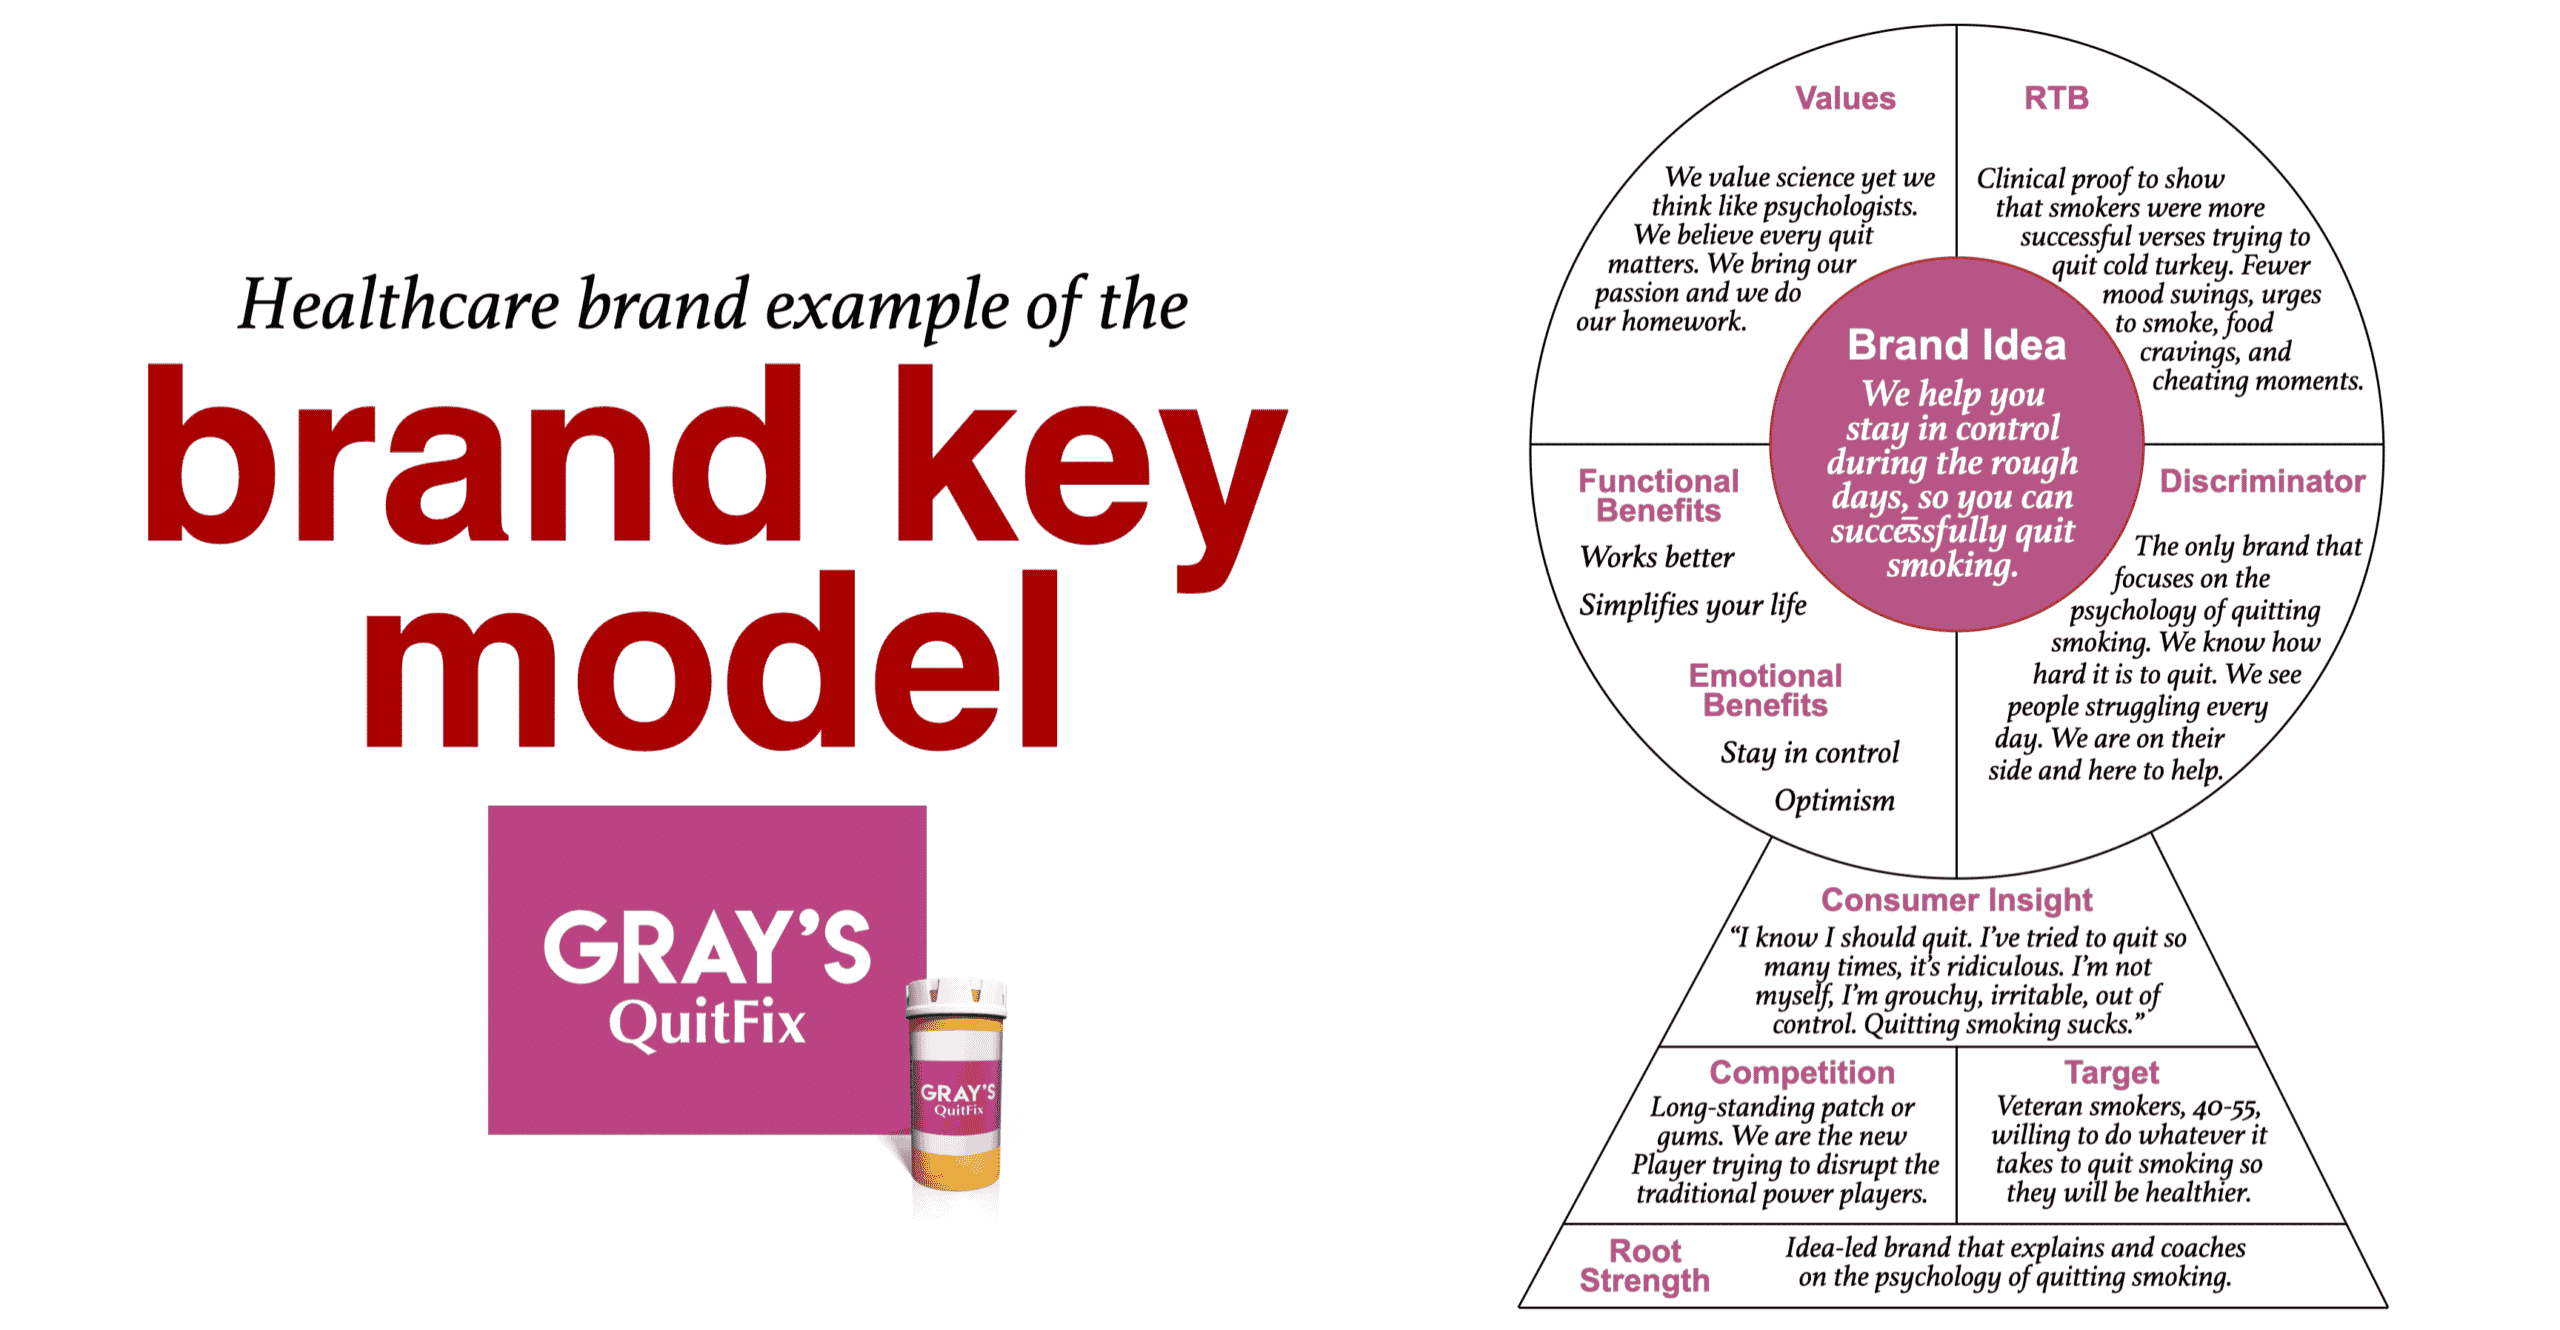 Brand Key Example for a Healthcare or pharma brand unique selling proposition